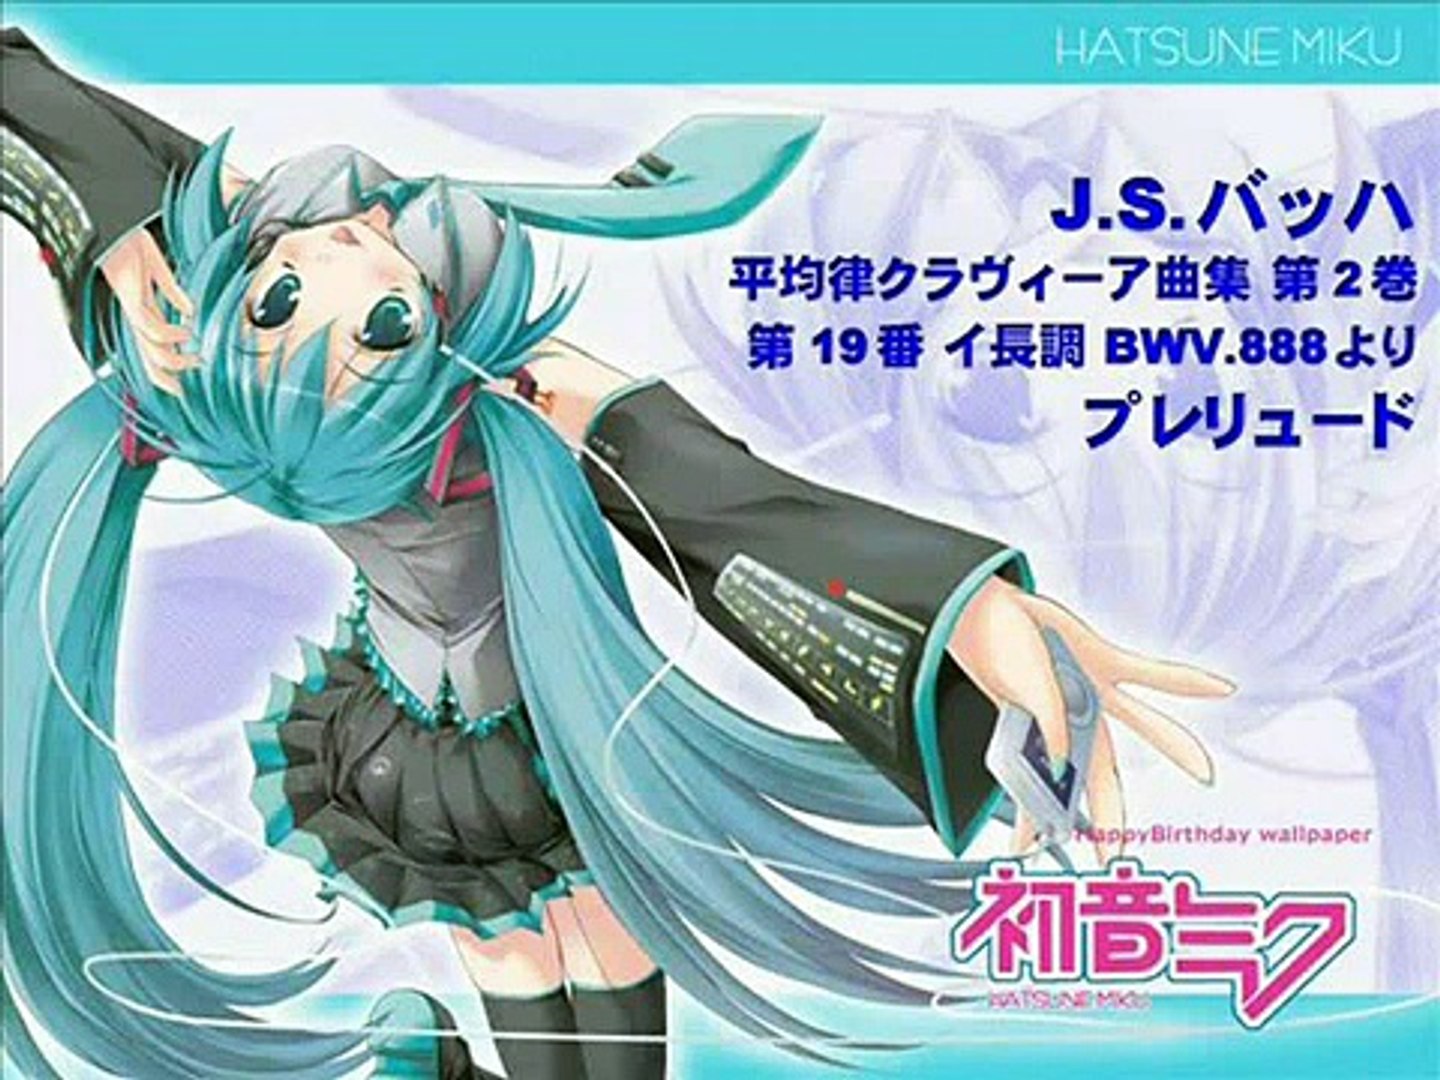 Book 2 19 Bwv 8 Bach Well Tempered Clavier 初音ミク 平均律クラヴィーア曲集 Video Dailymotion